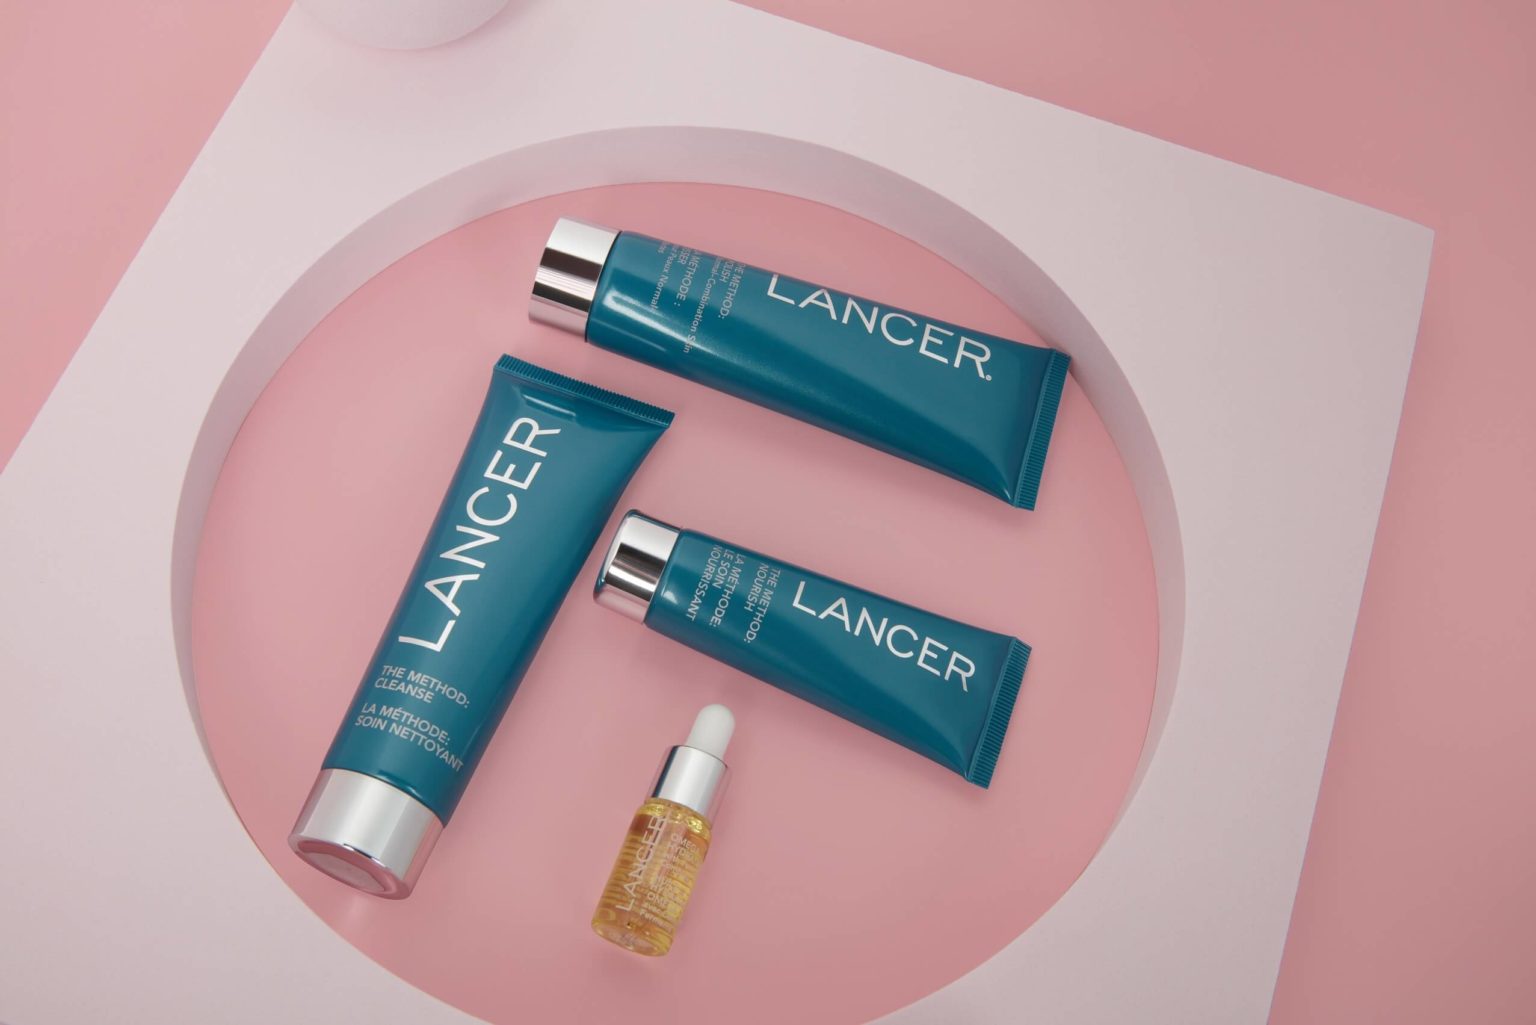 Lancer beauty products